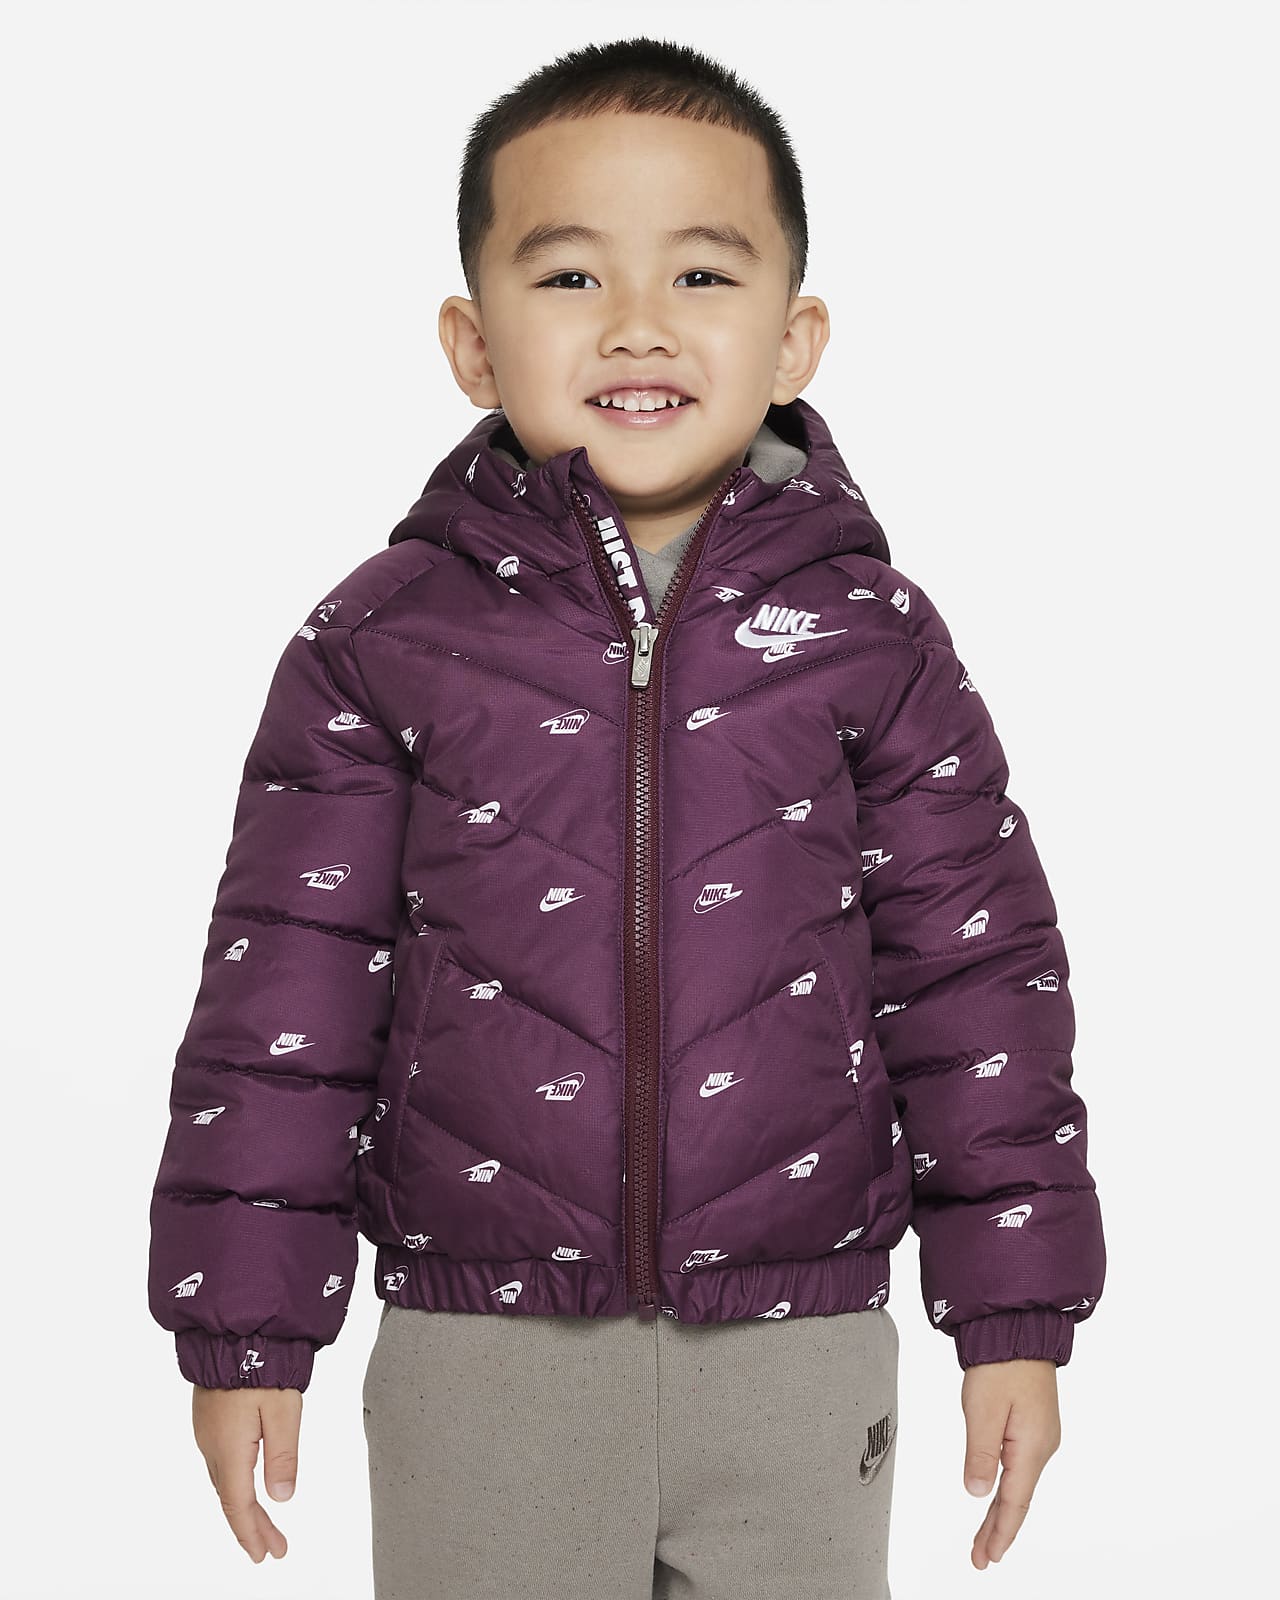 Nike Synfill Hooded Jacket Toddler Jacket